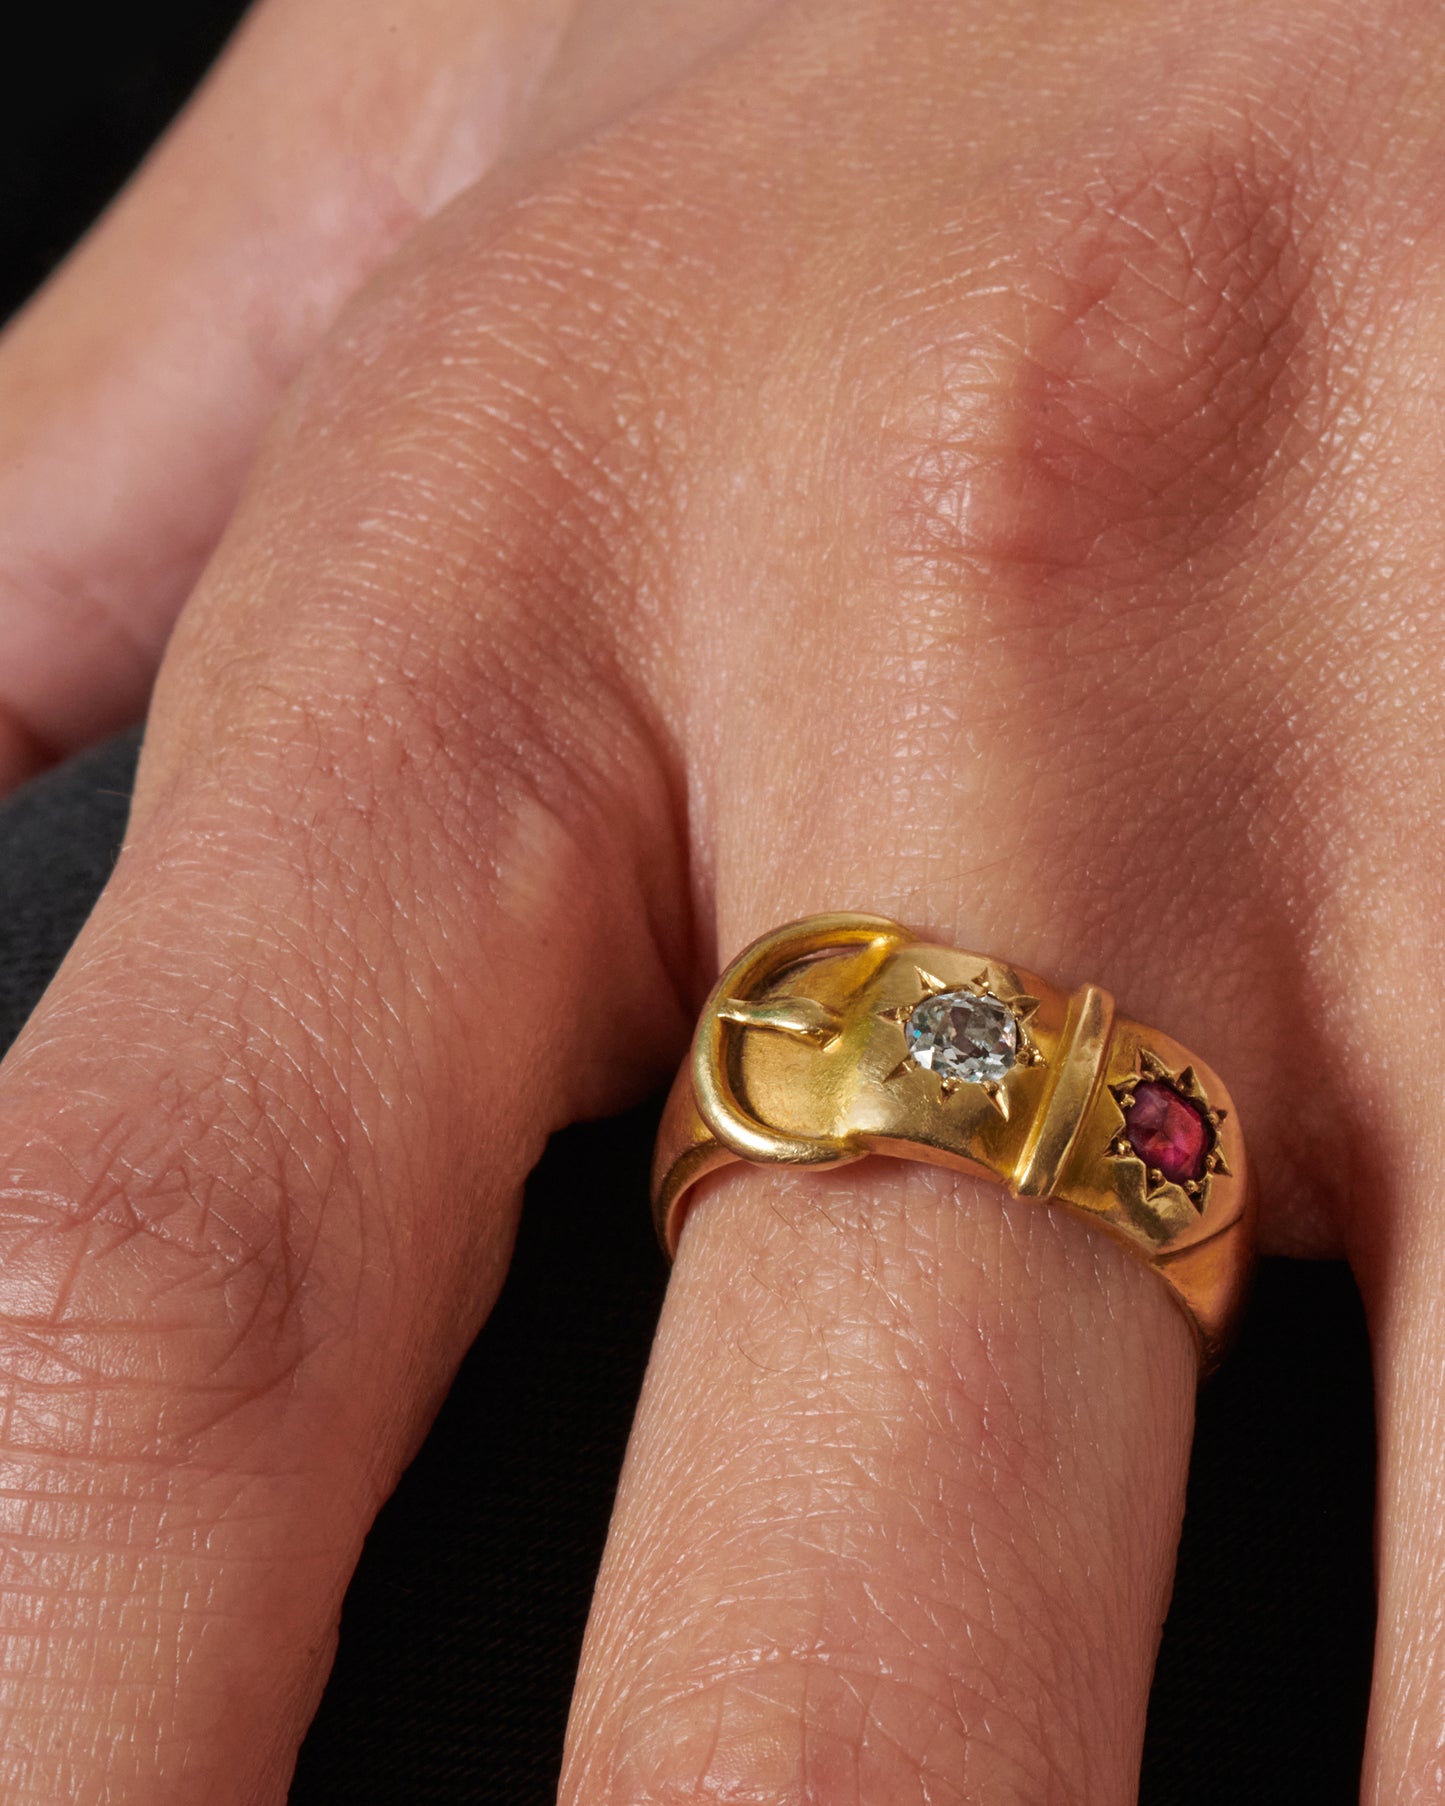 Dating back 1891 in Birmingham, England, this buckle ring is buttery soft with an old mine cut diamond and ruby.